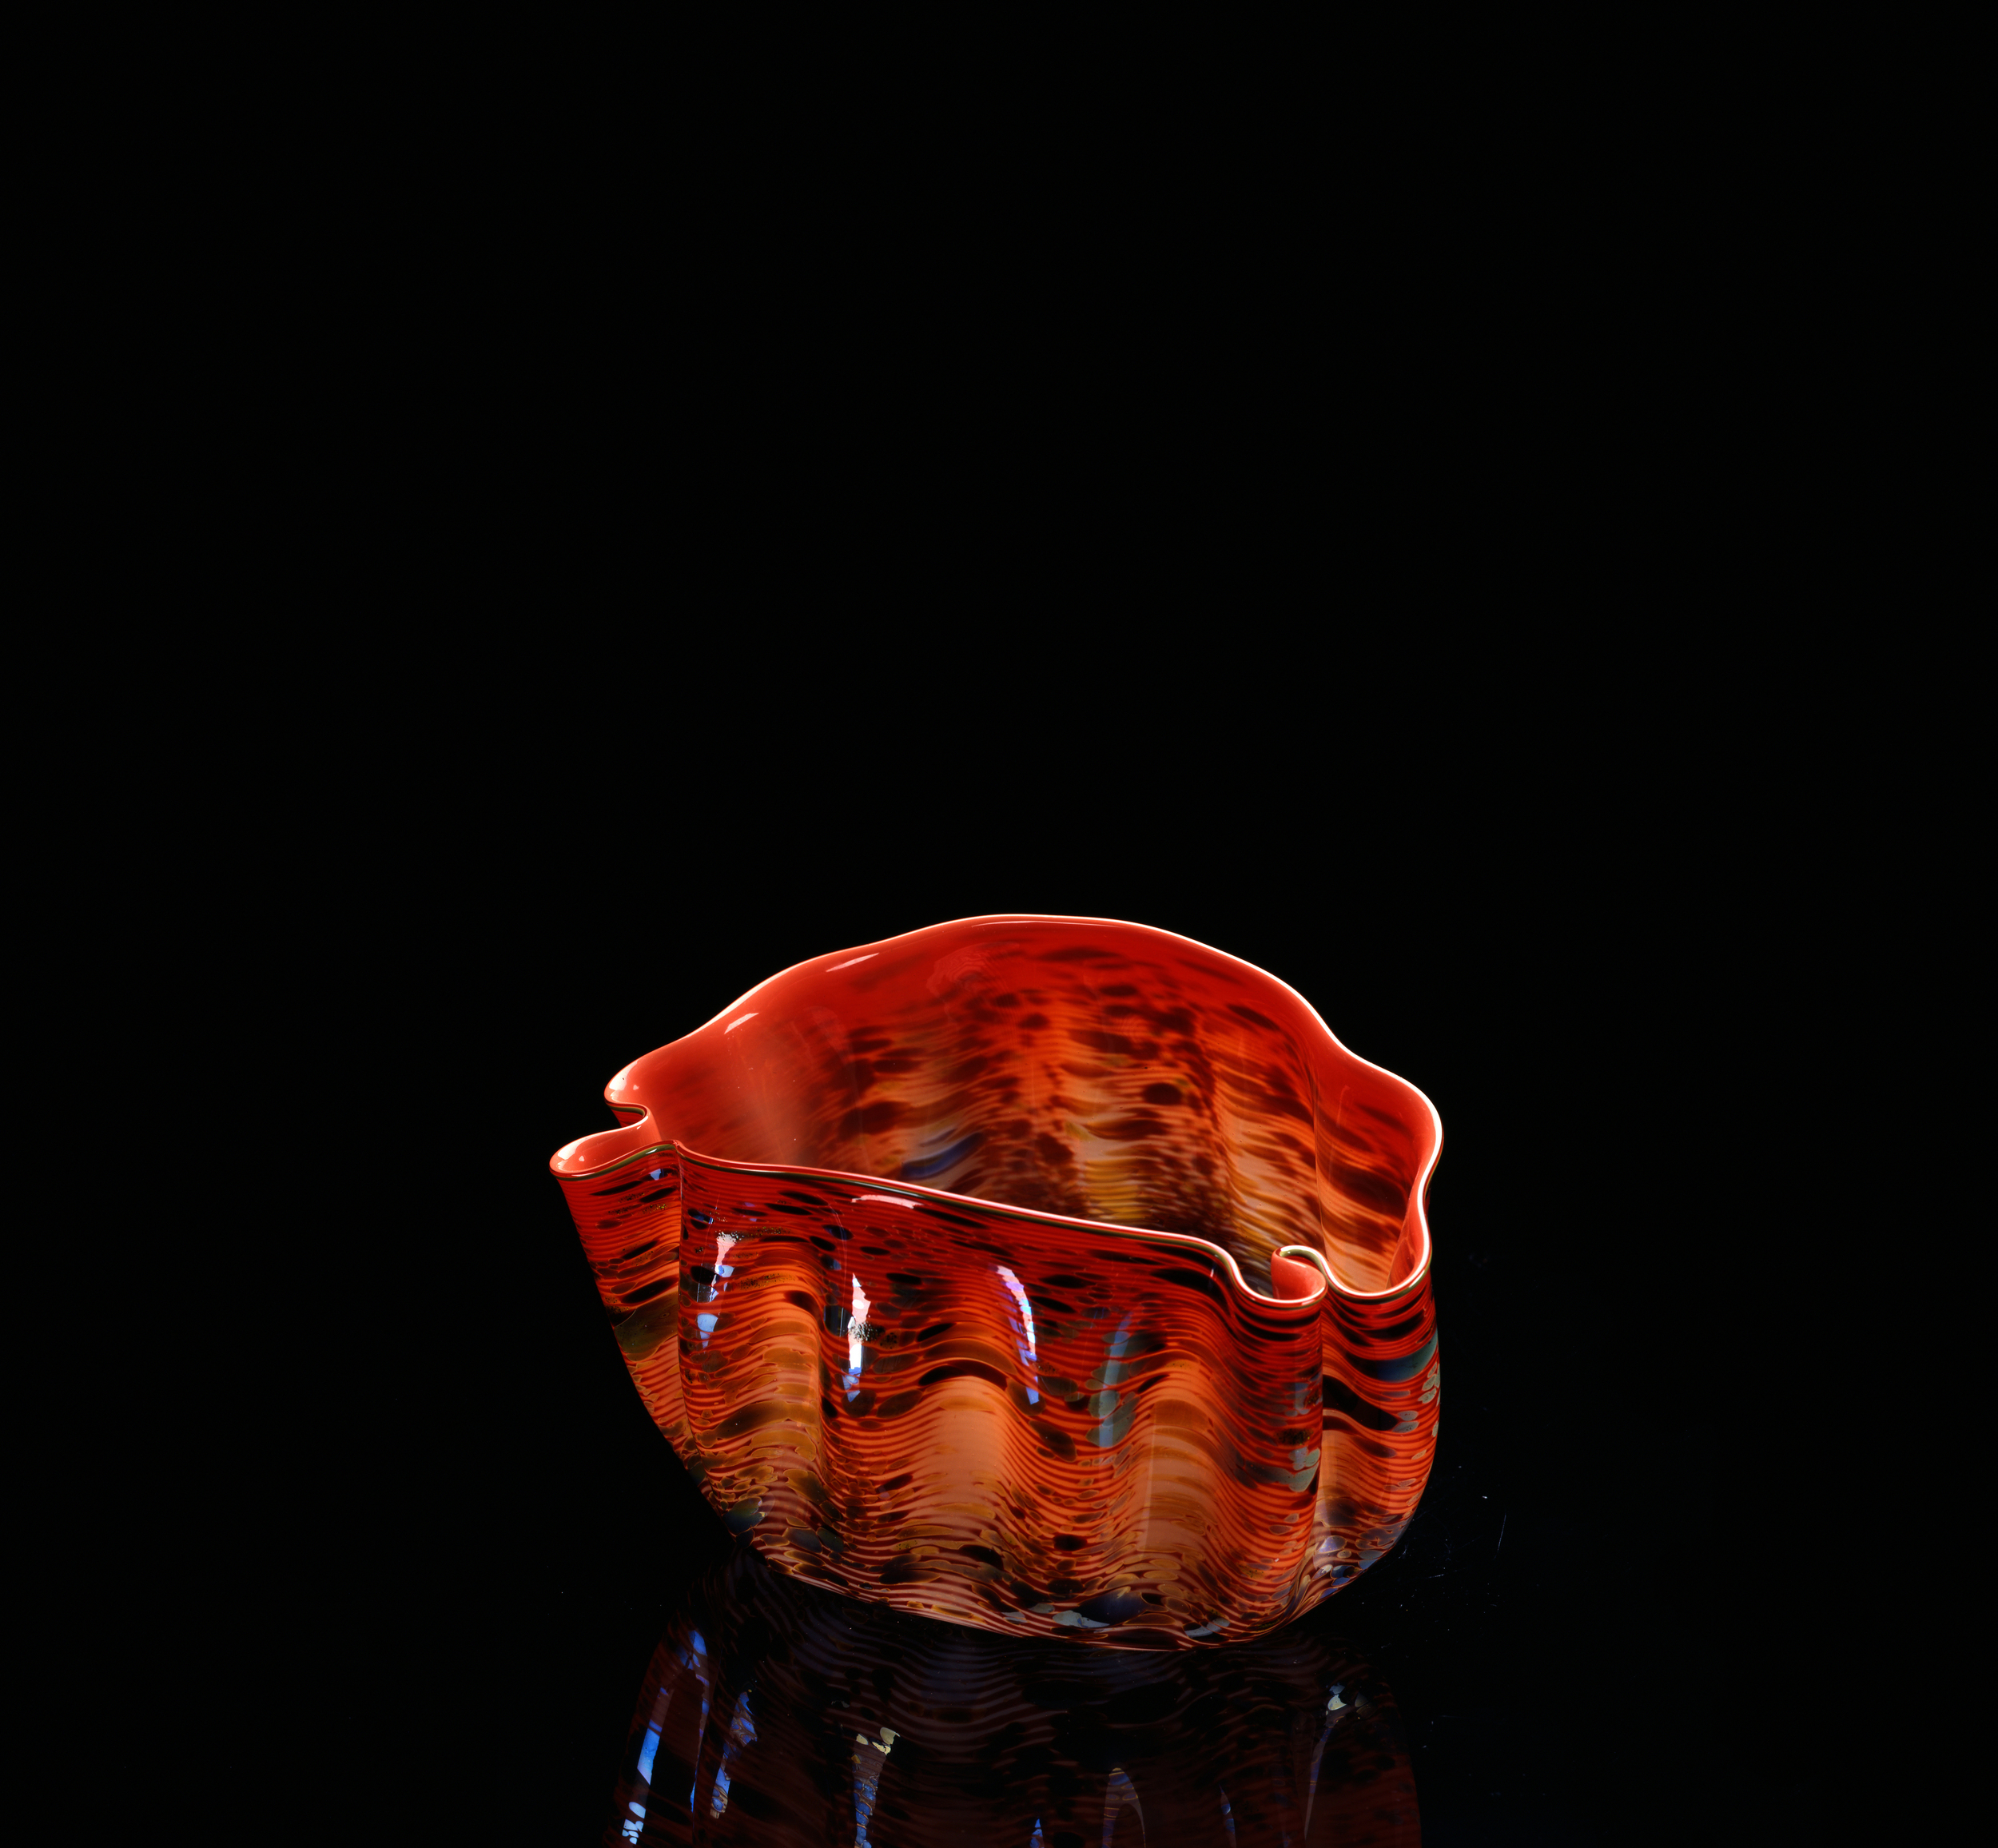  Dale Chihuly,&nbsp; Scarlet Red Macchia with Green Lip Wrap&nbsp; (1983, glass, 10 x 14 x 9 inches), DC.327 